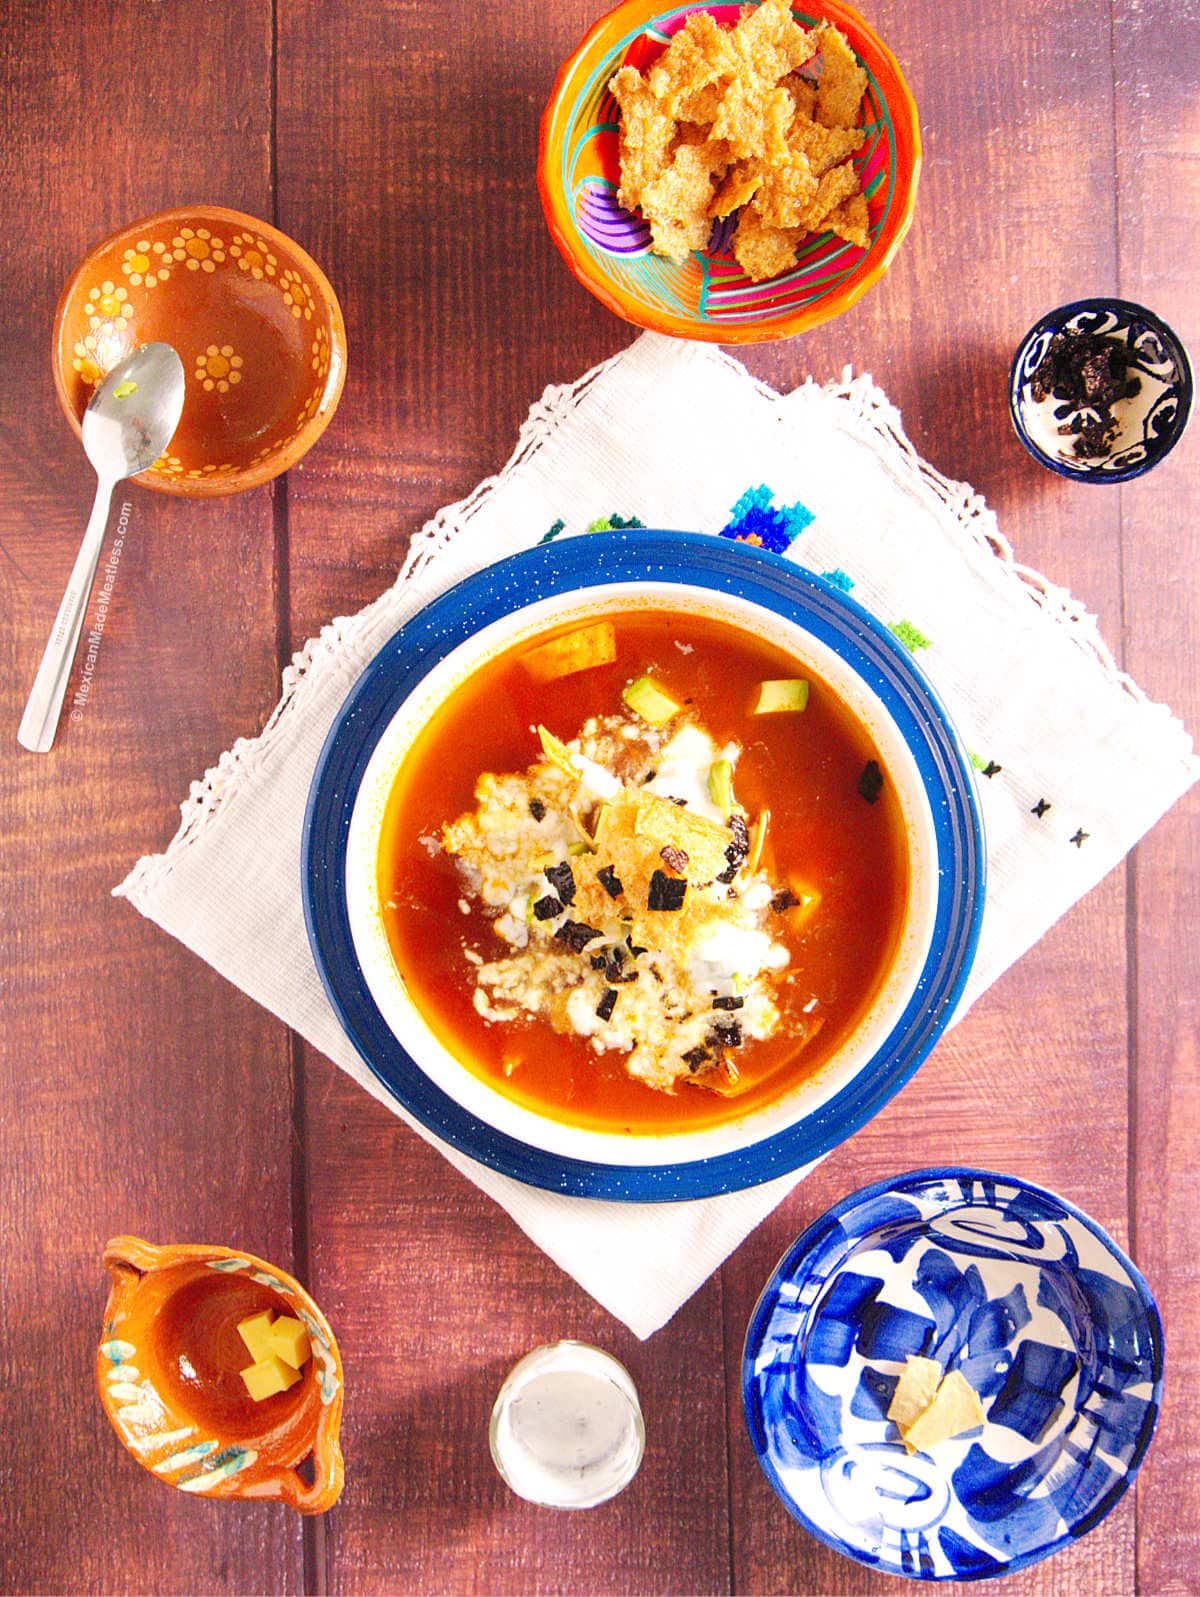 View from above of a white bowl filled with tortilla soup and small decorative bowls.